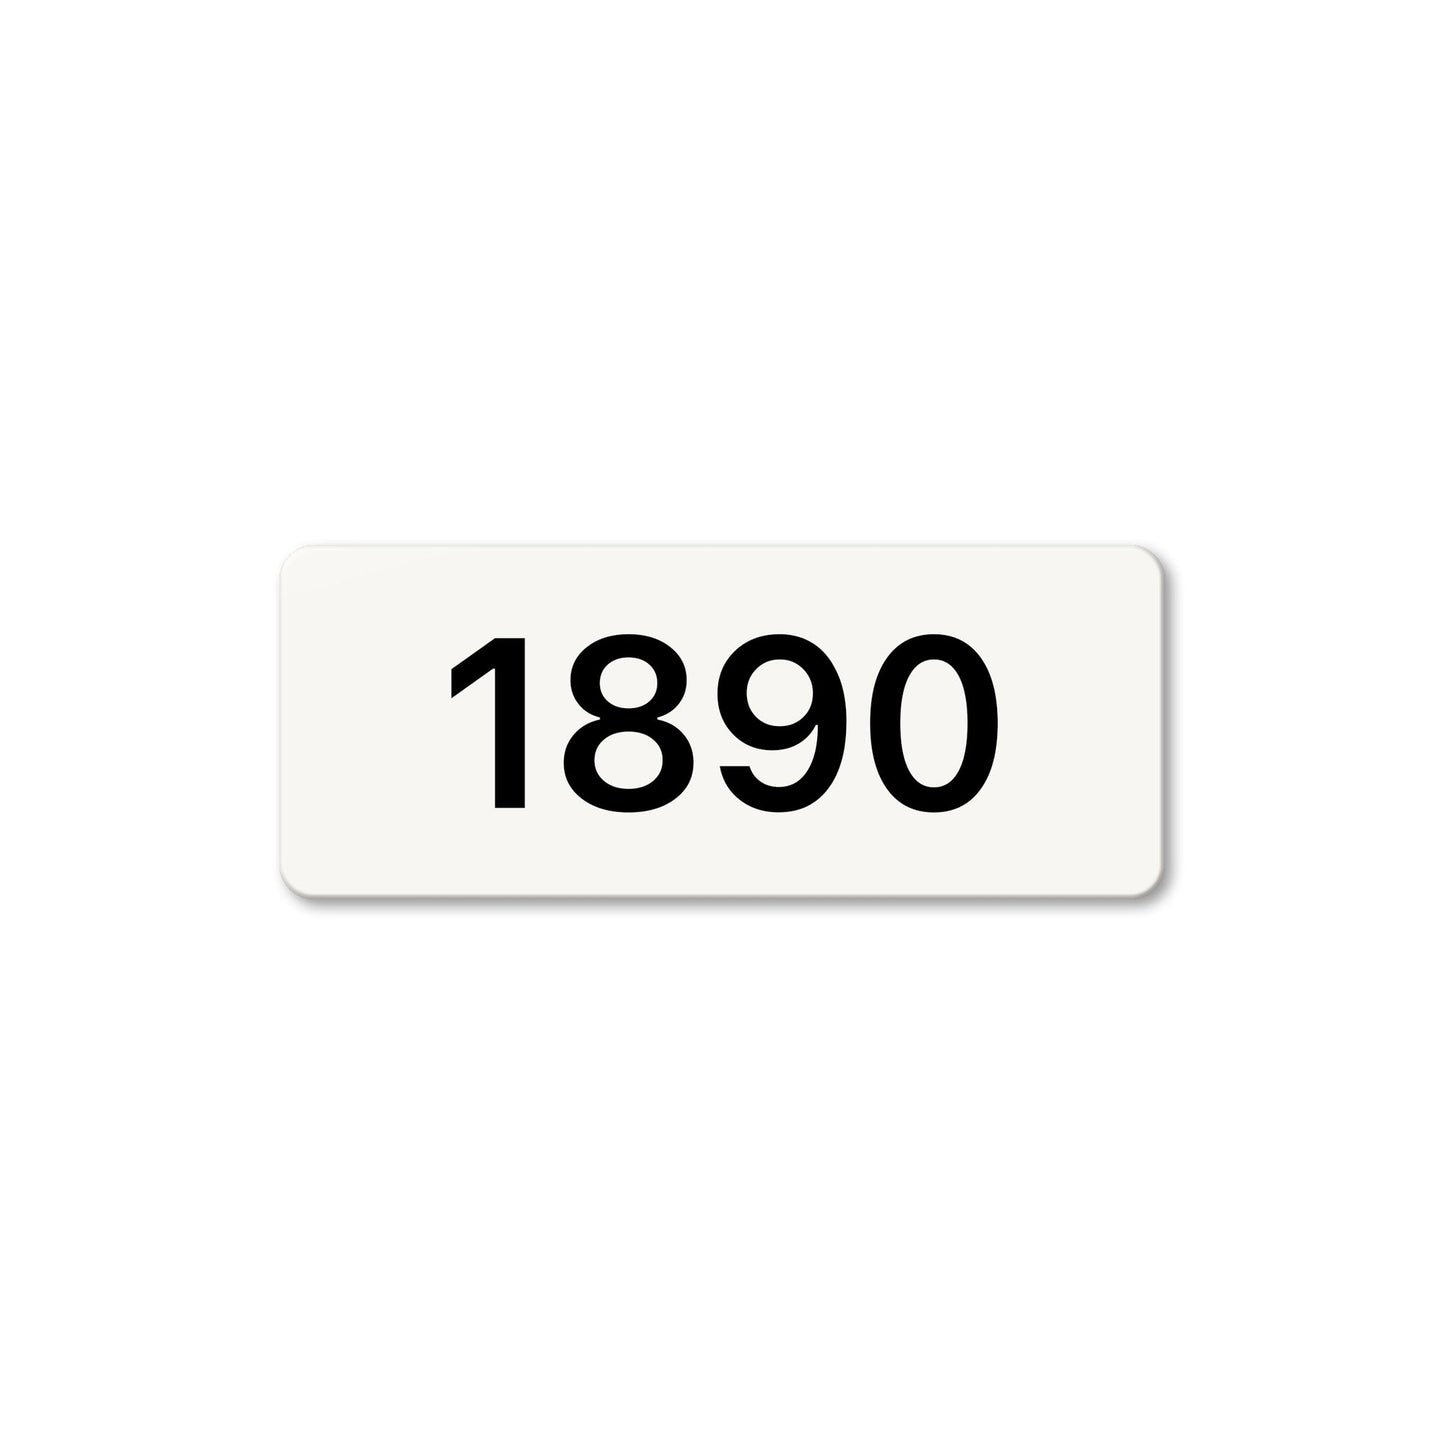 Numeral 1890